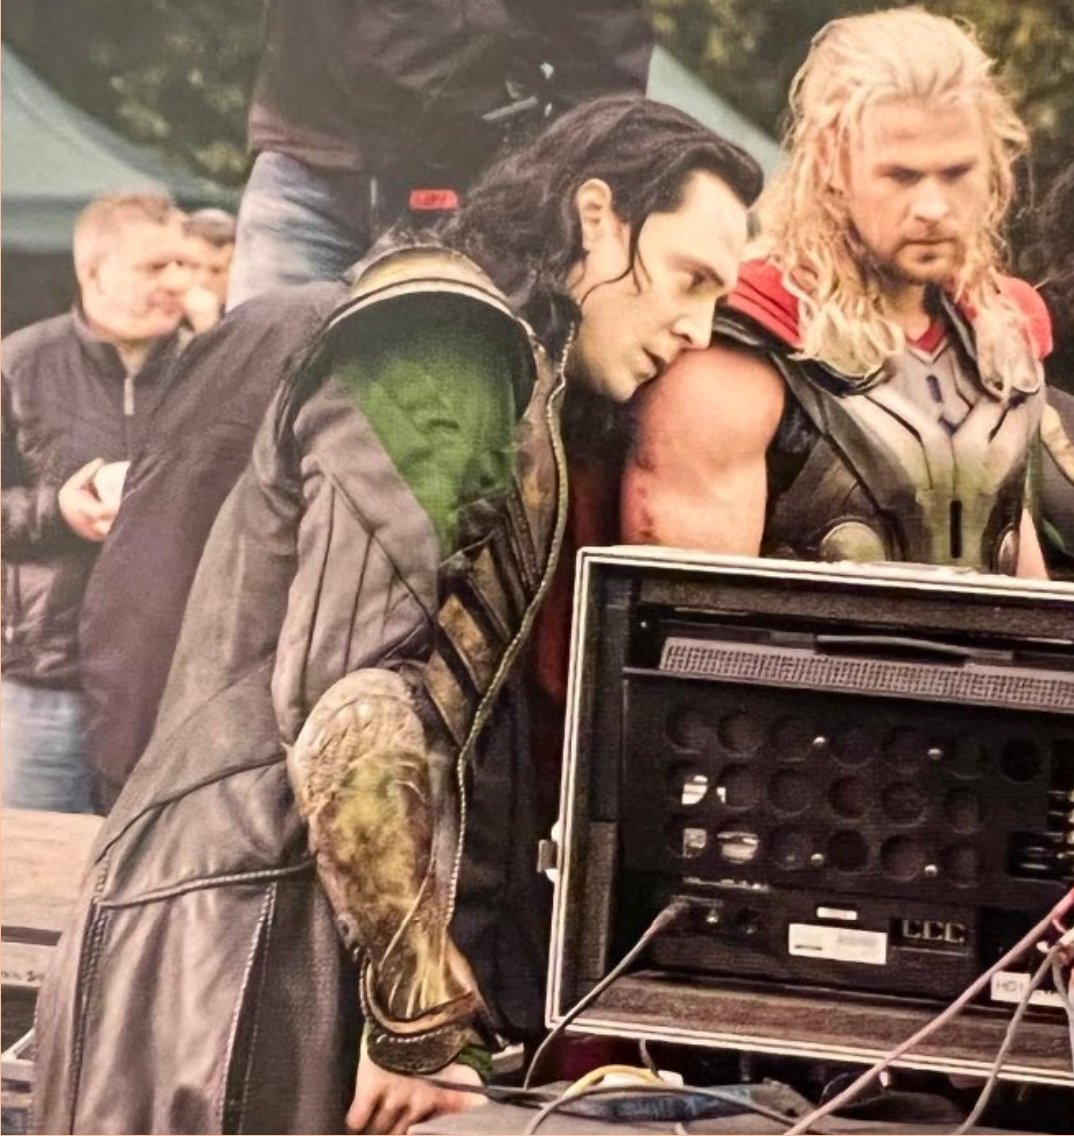 RT @archiveloki: old/new loki and thor bts in avengers (2012) https://t.co/ddiDPEV0IJ